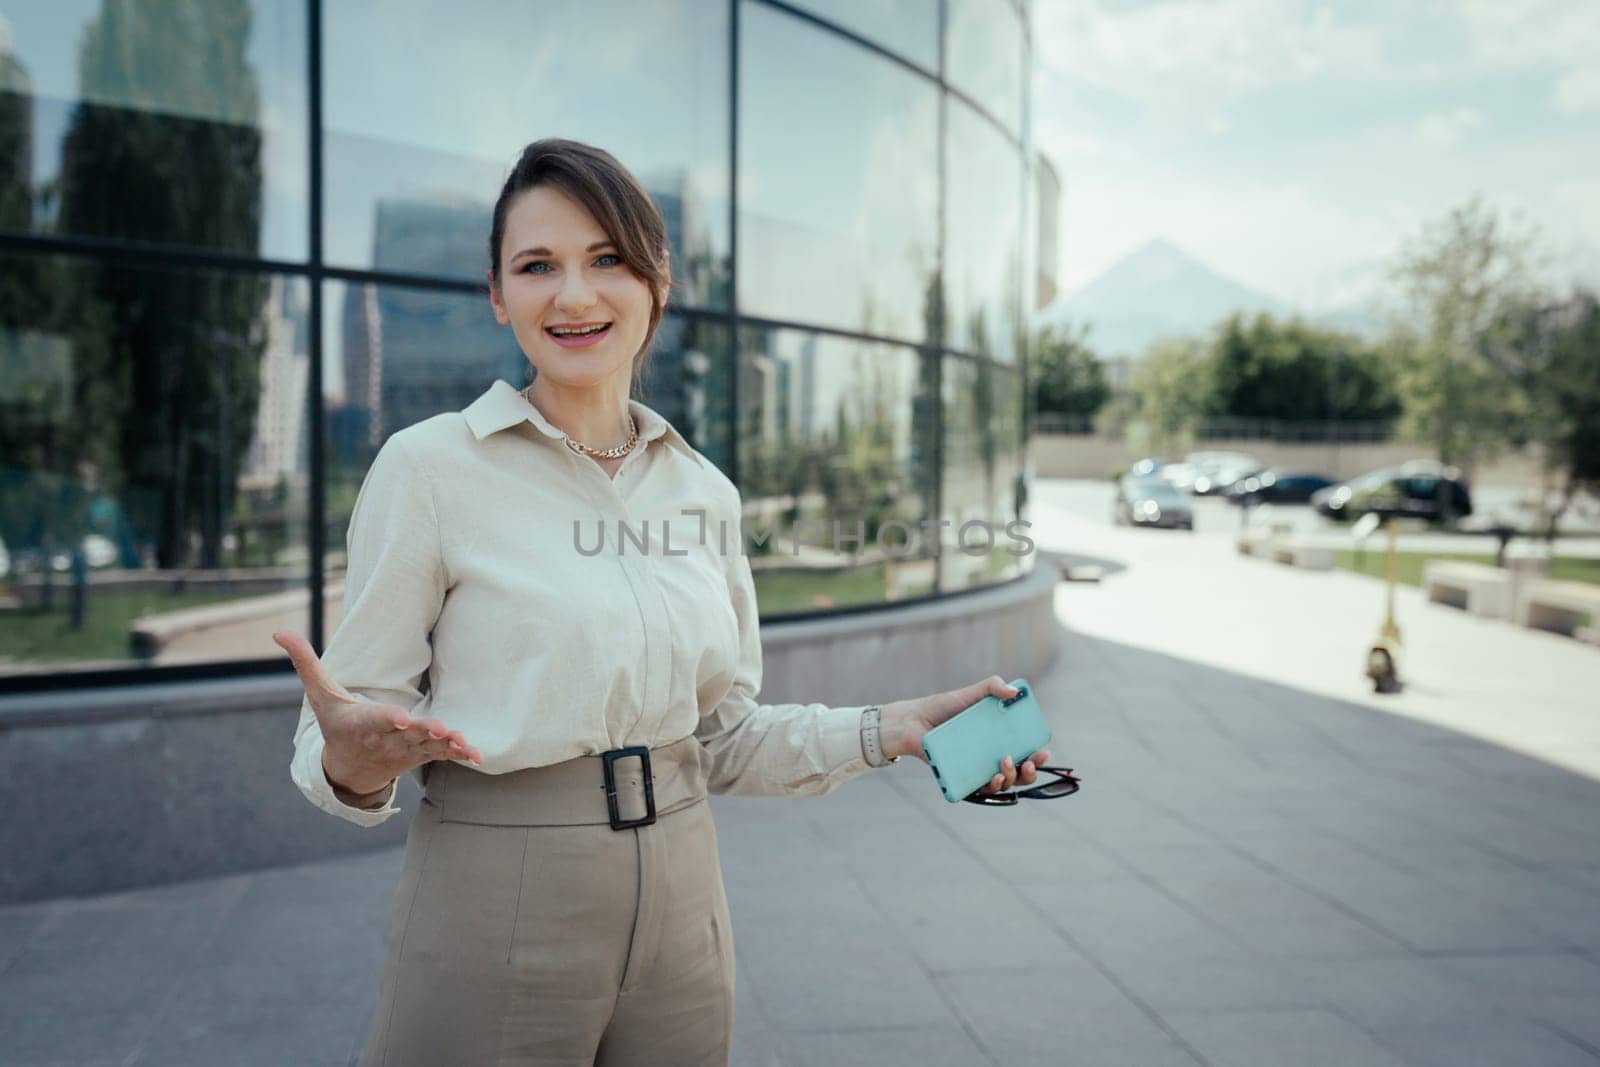 Joyful woman with outstretched hands outdoor portrait in business office style with phone in hand in the city street.